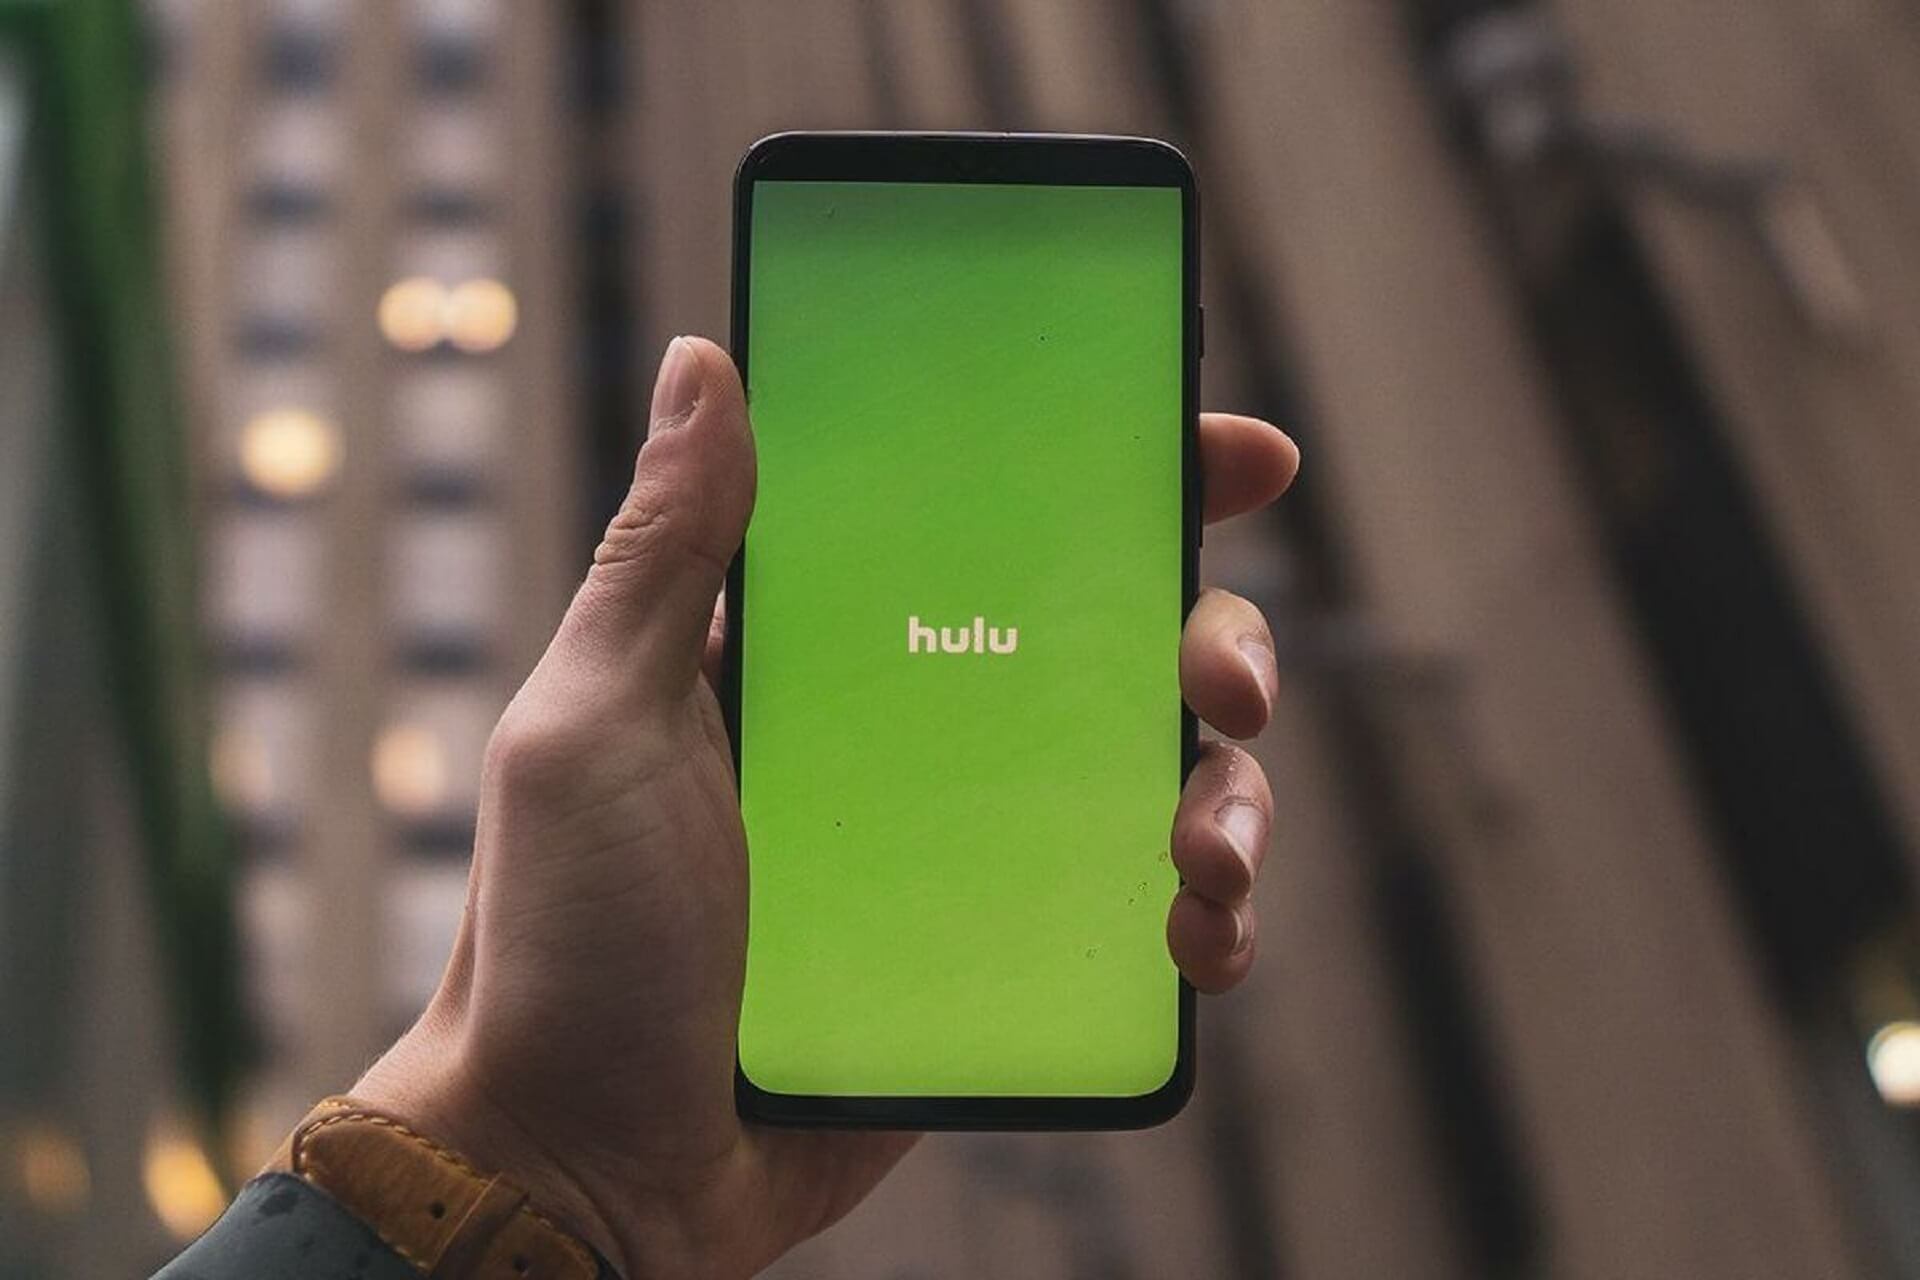 Error playing this video while streaming on Hulu